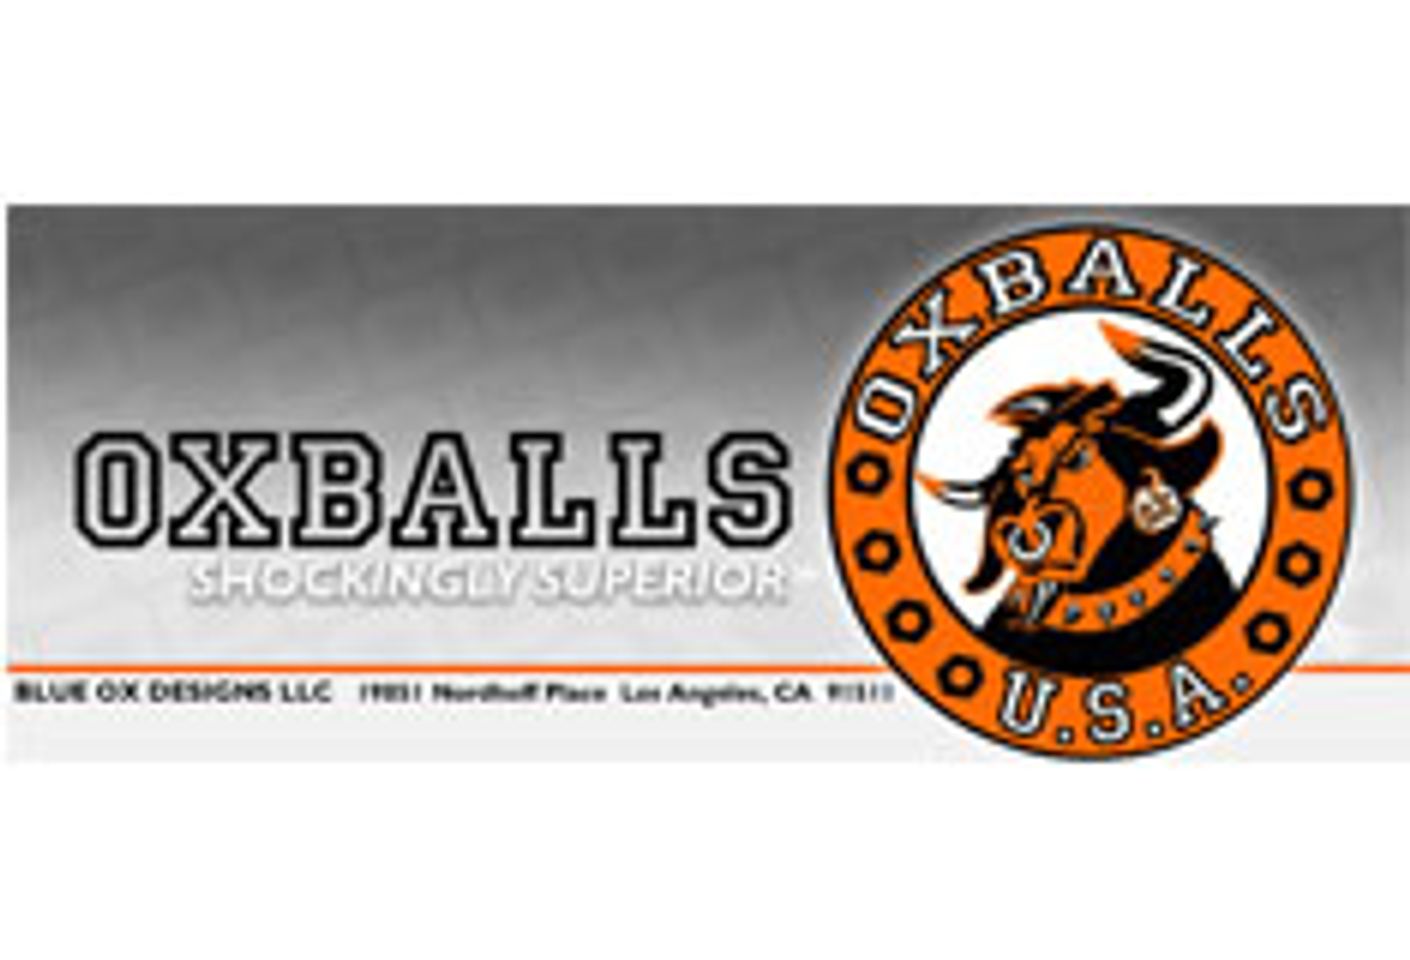 StorErotica Awards Honors Oxballs With Nomination